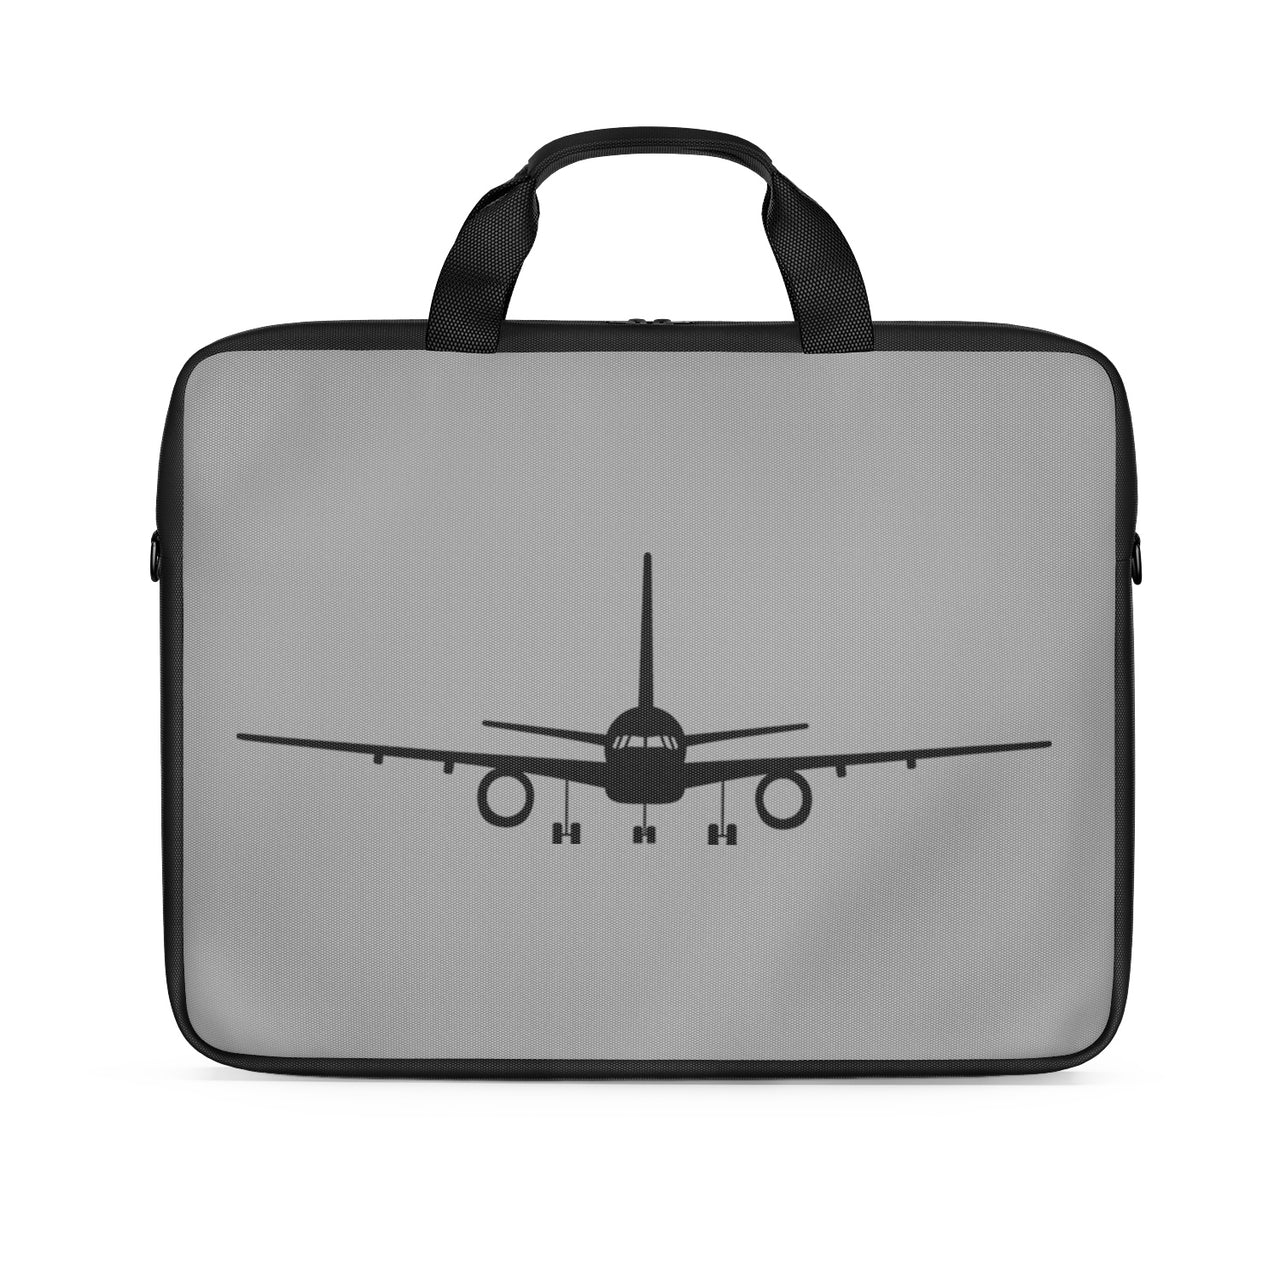 Boeing 757 Silhouette Designed Laptop & Tablet Bags